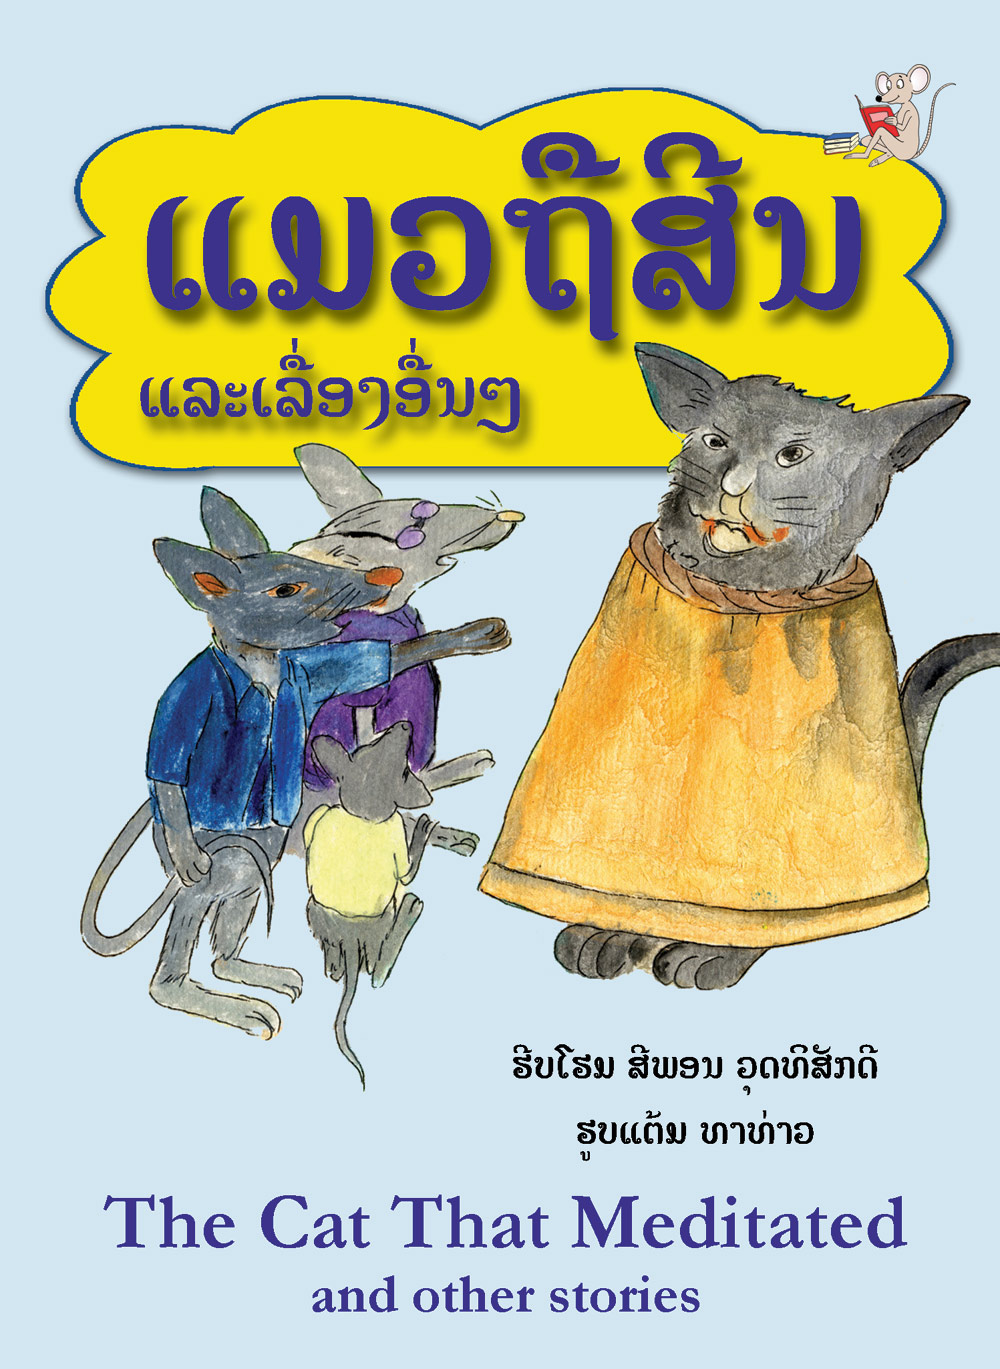 The Cat that Meditated large book cover, published in Lao and English